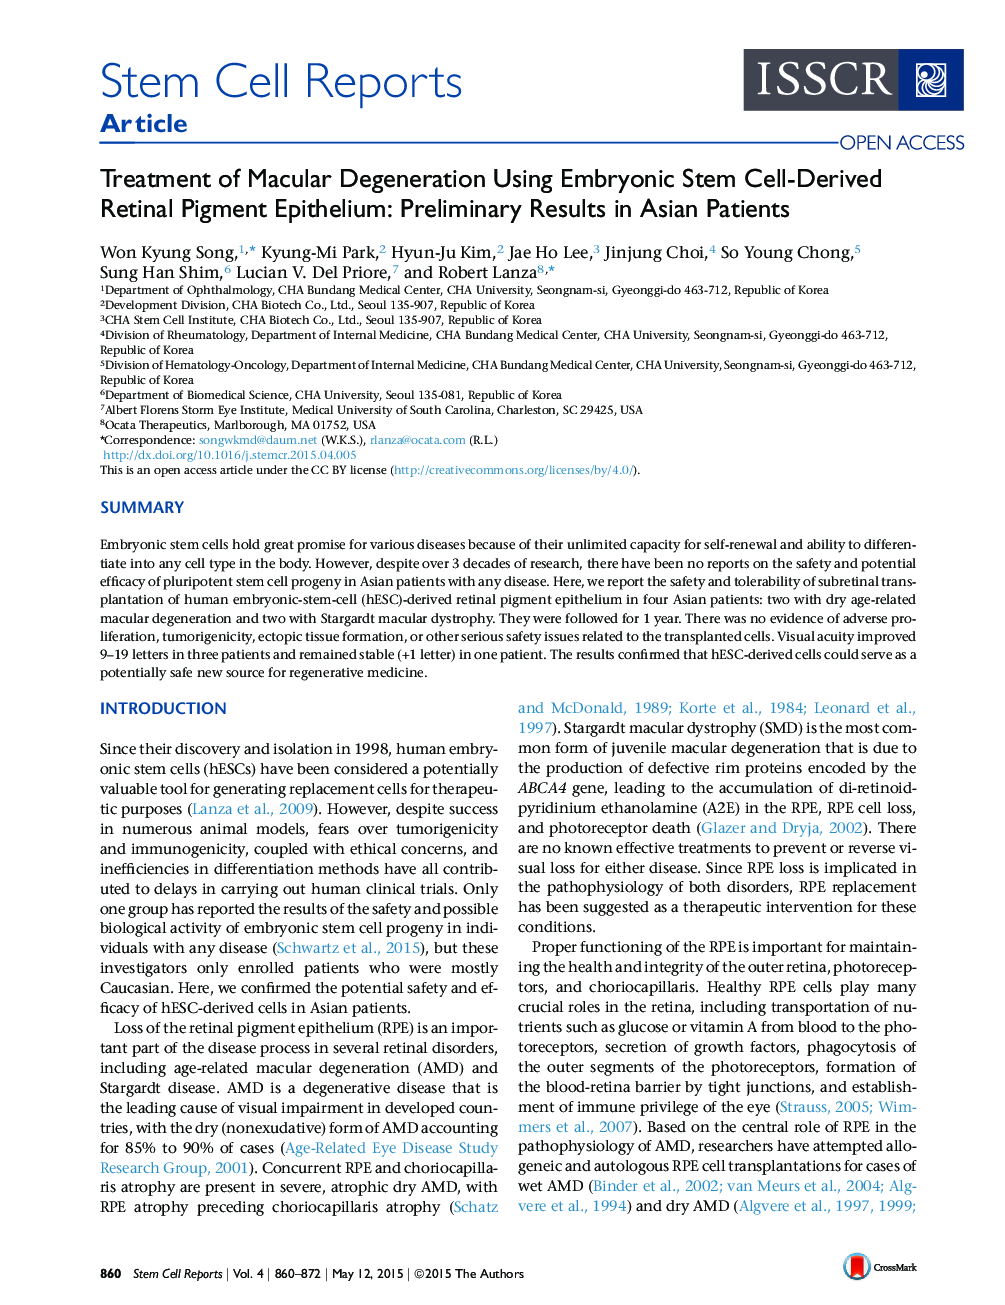 Treatment of Macular Degeneration Using Embryonic Stem Cell-Derived Retinal Pigment Epithelium: Preliminary Results in Asian Patients 